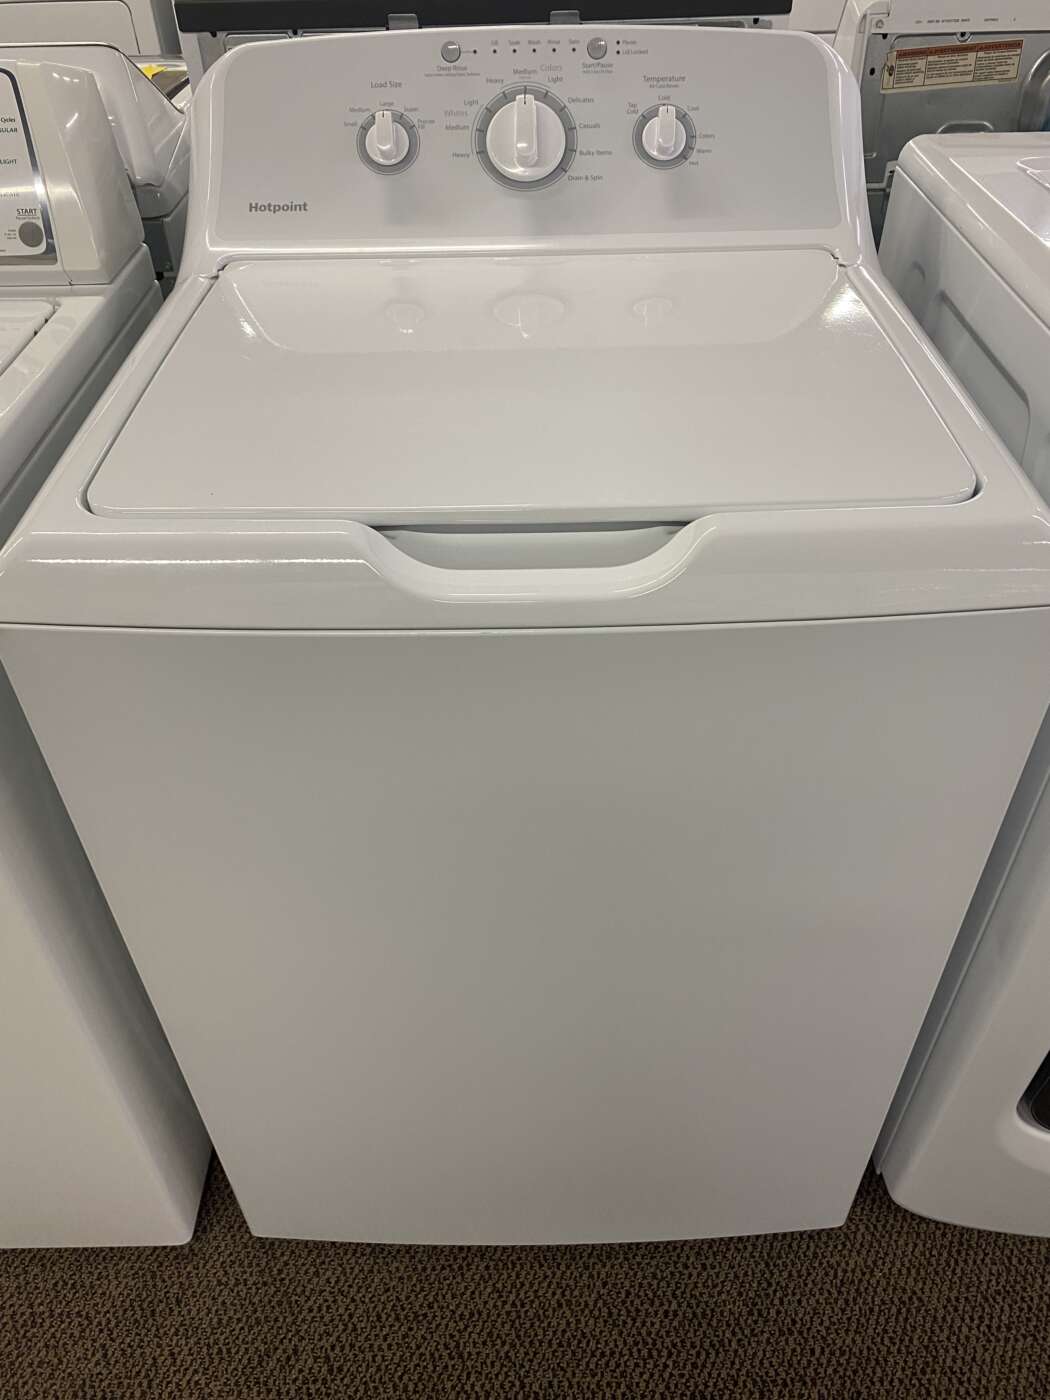 Reconditioned 3.8 Cu. Ft. Top-Load Washer With Stainless Steel Tub